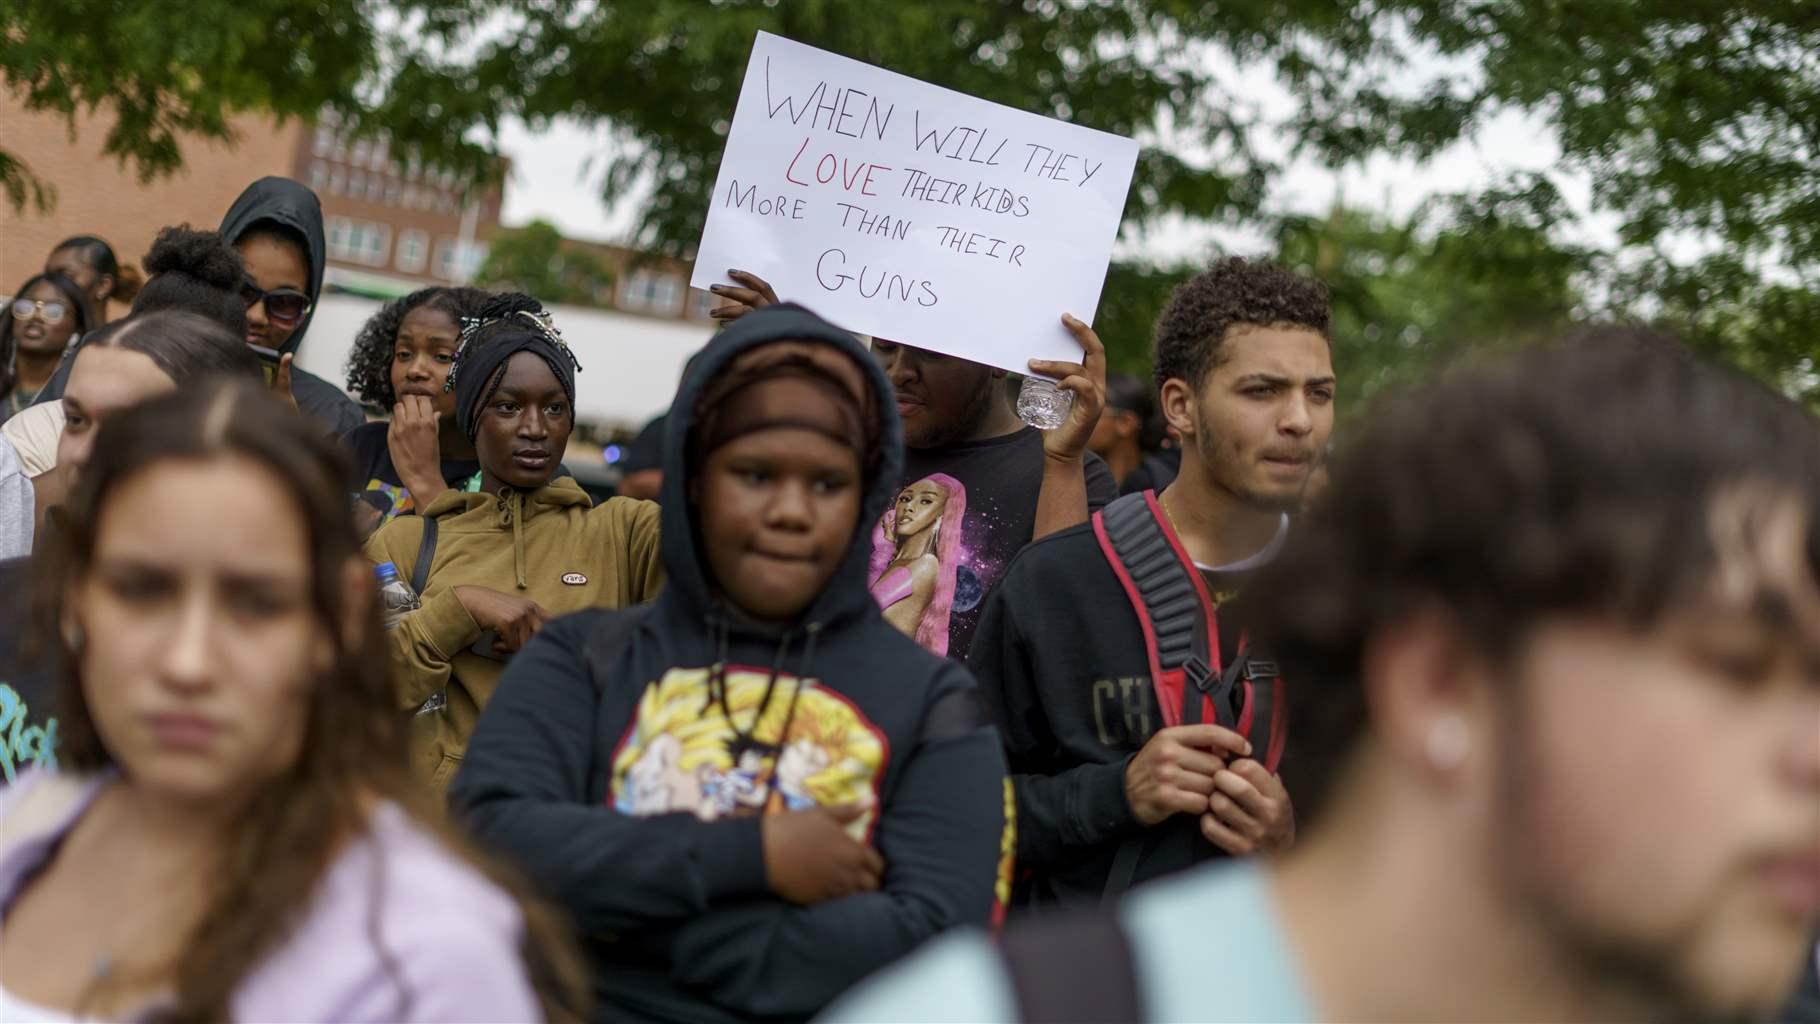 Pawtucket high school students attend a rally at city hall after walking out of their schools to protest the nation's gun policies, Wednesday, June 1, 2022, in Pawtucket, R.I.